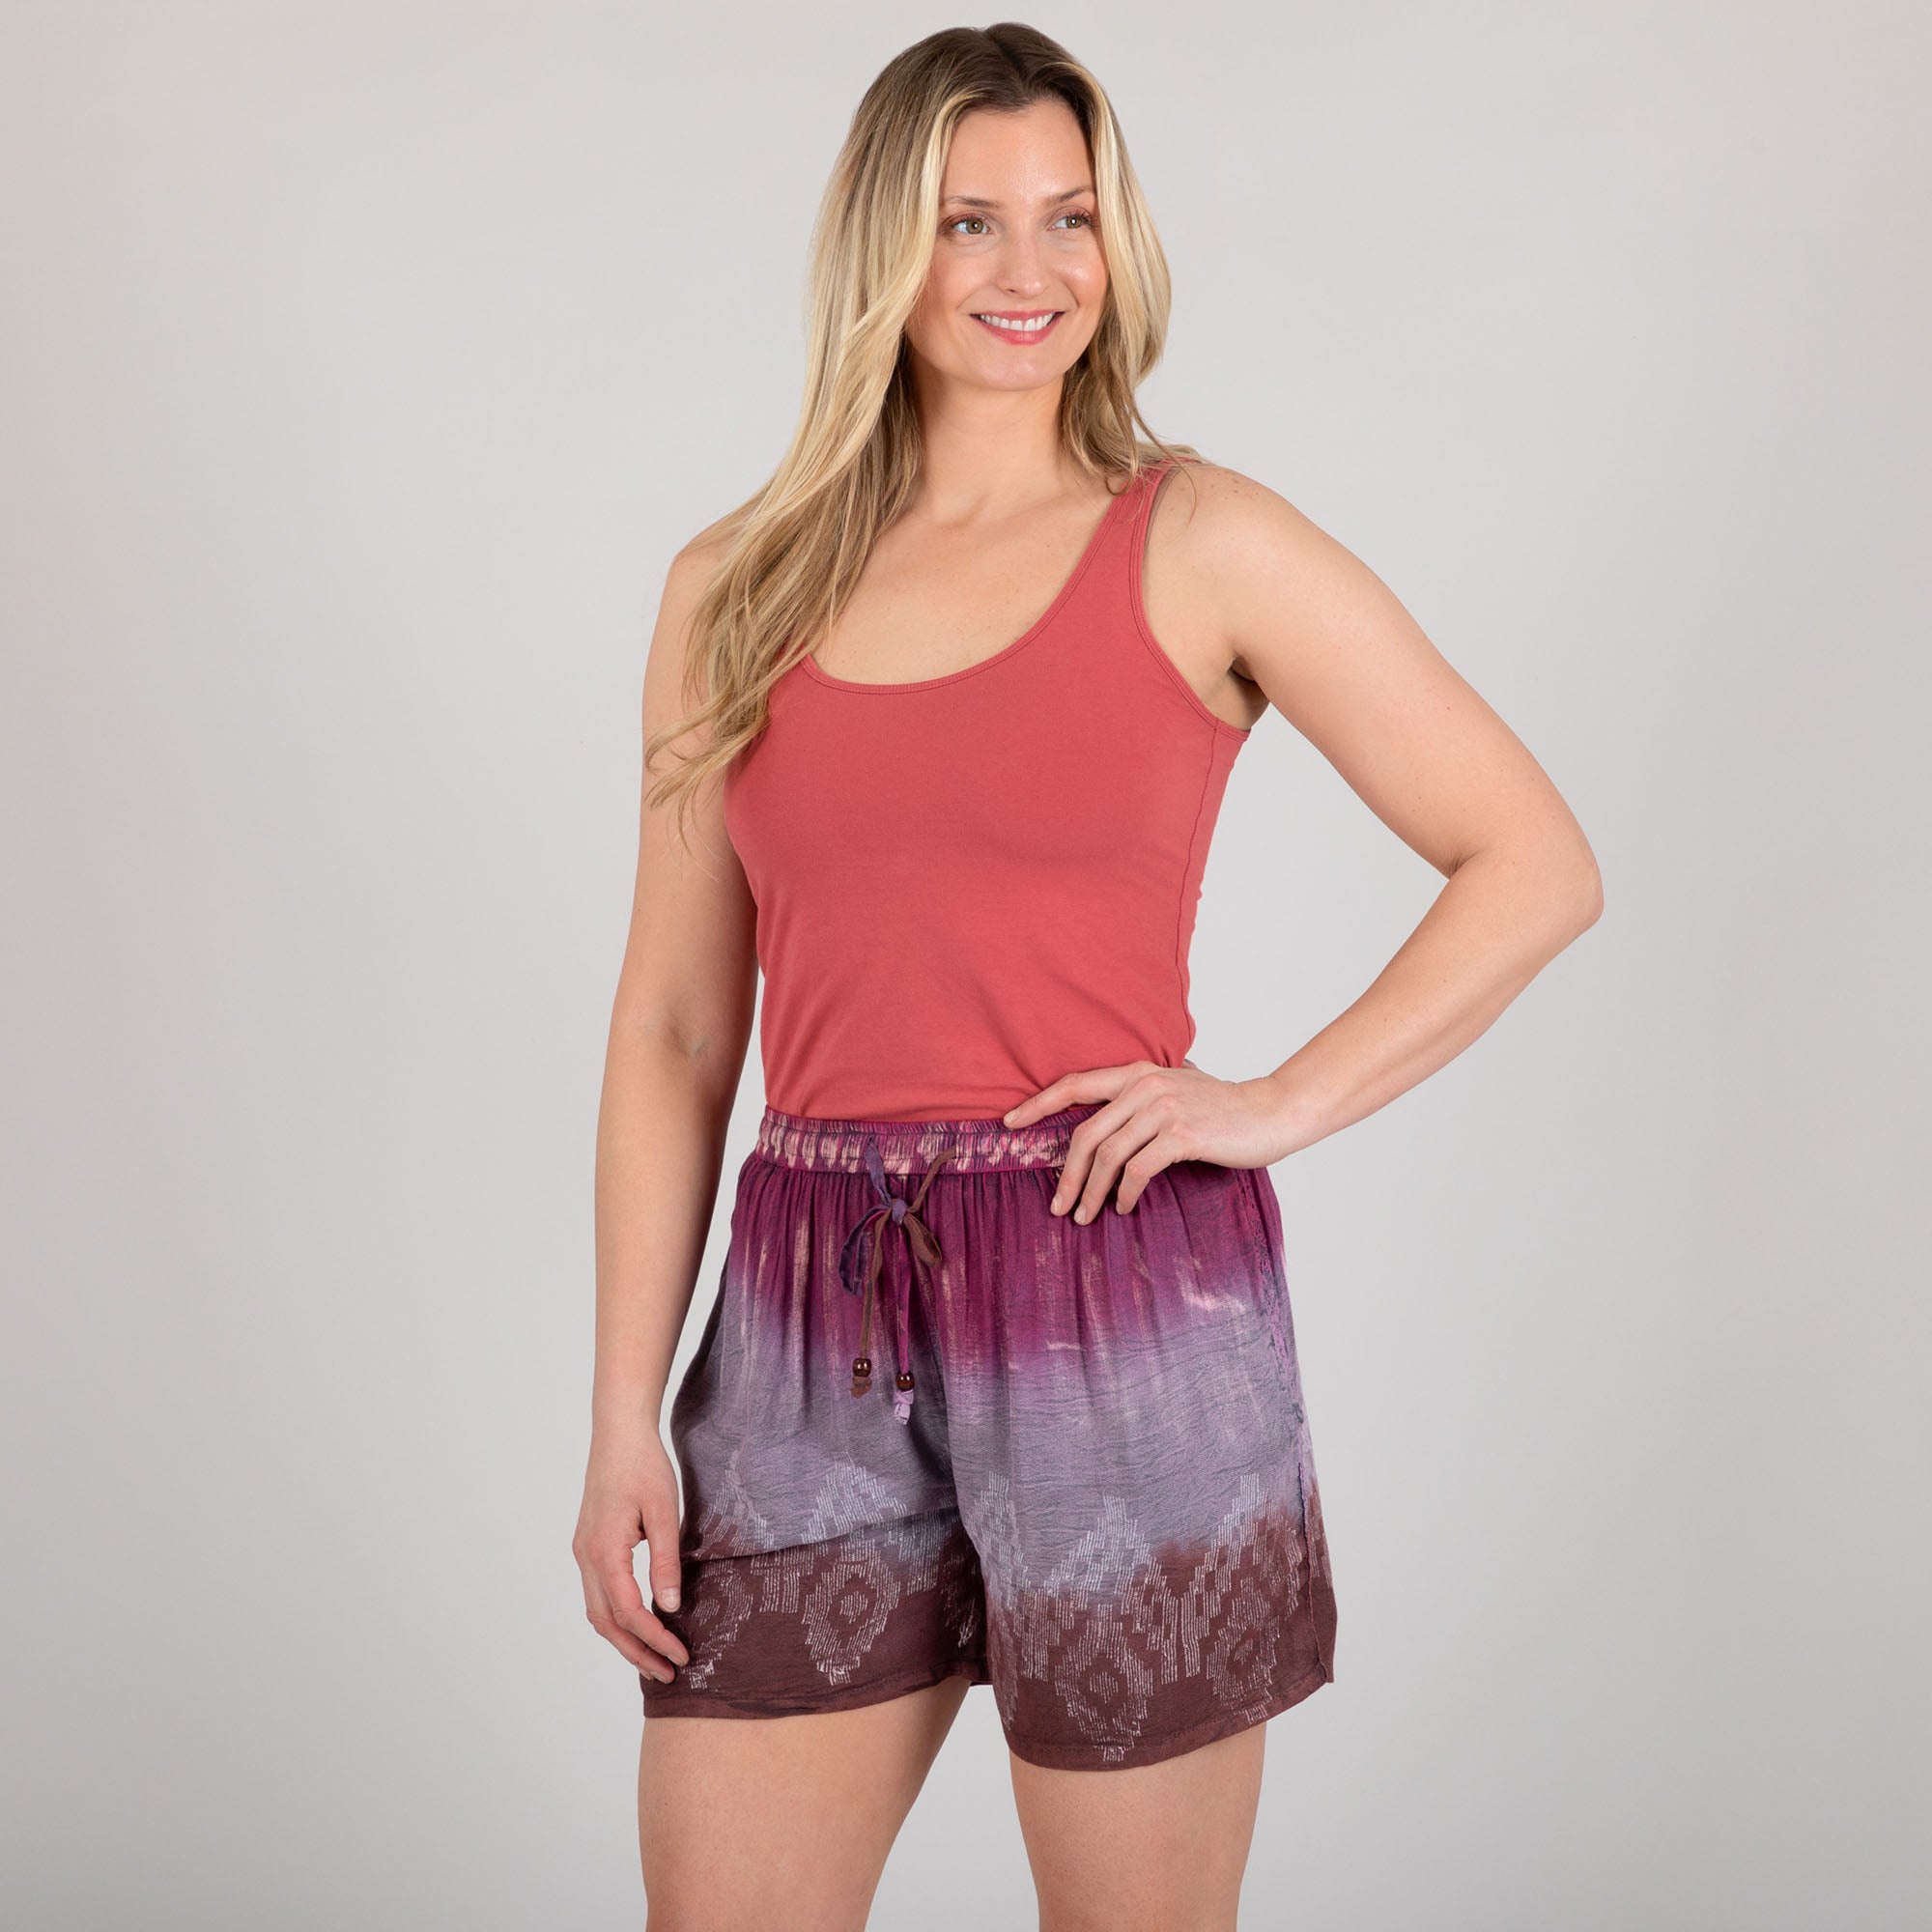 Earthbound Hand Dyed Drawstring Shorts - 1X